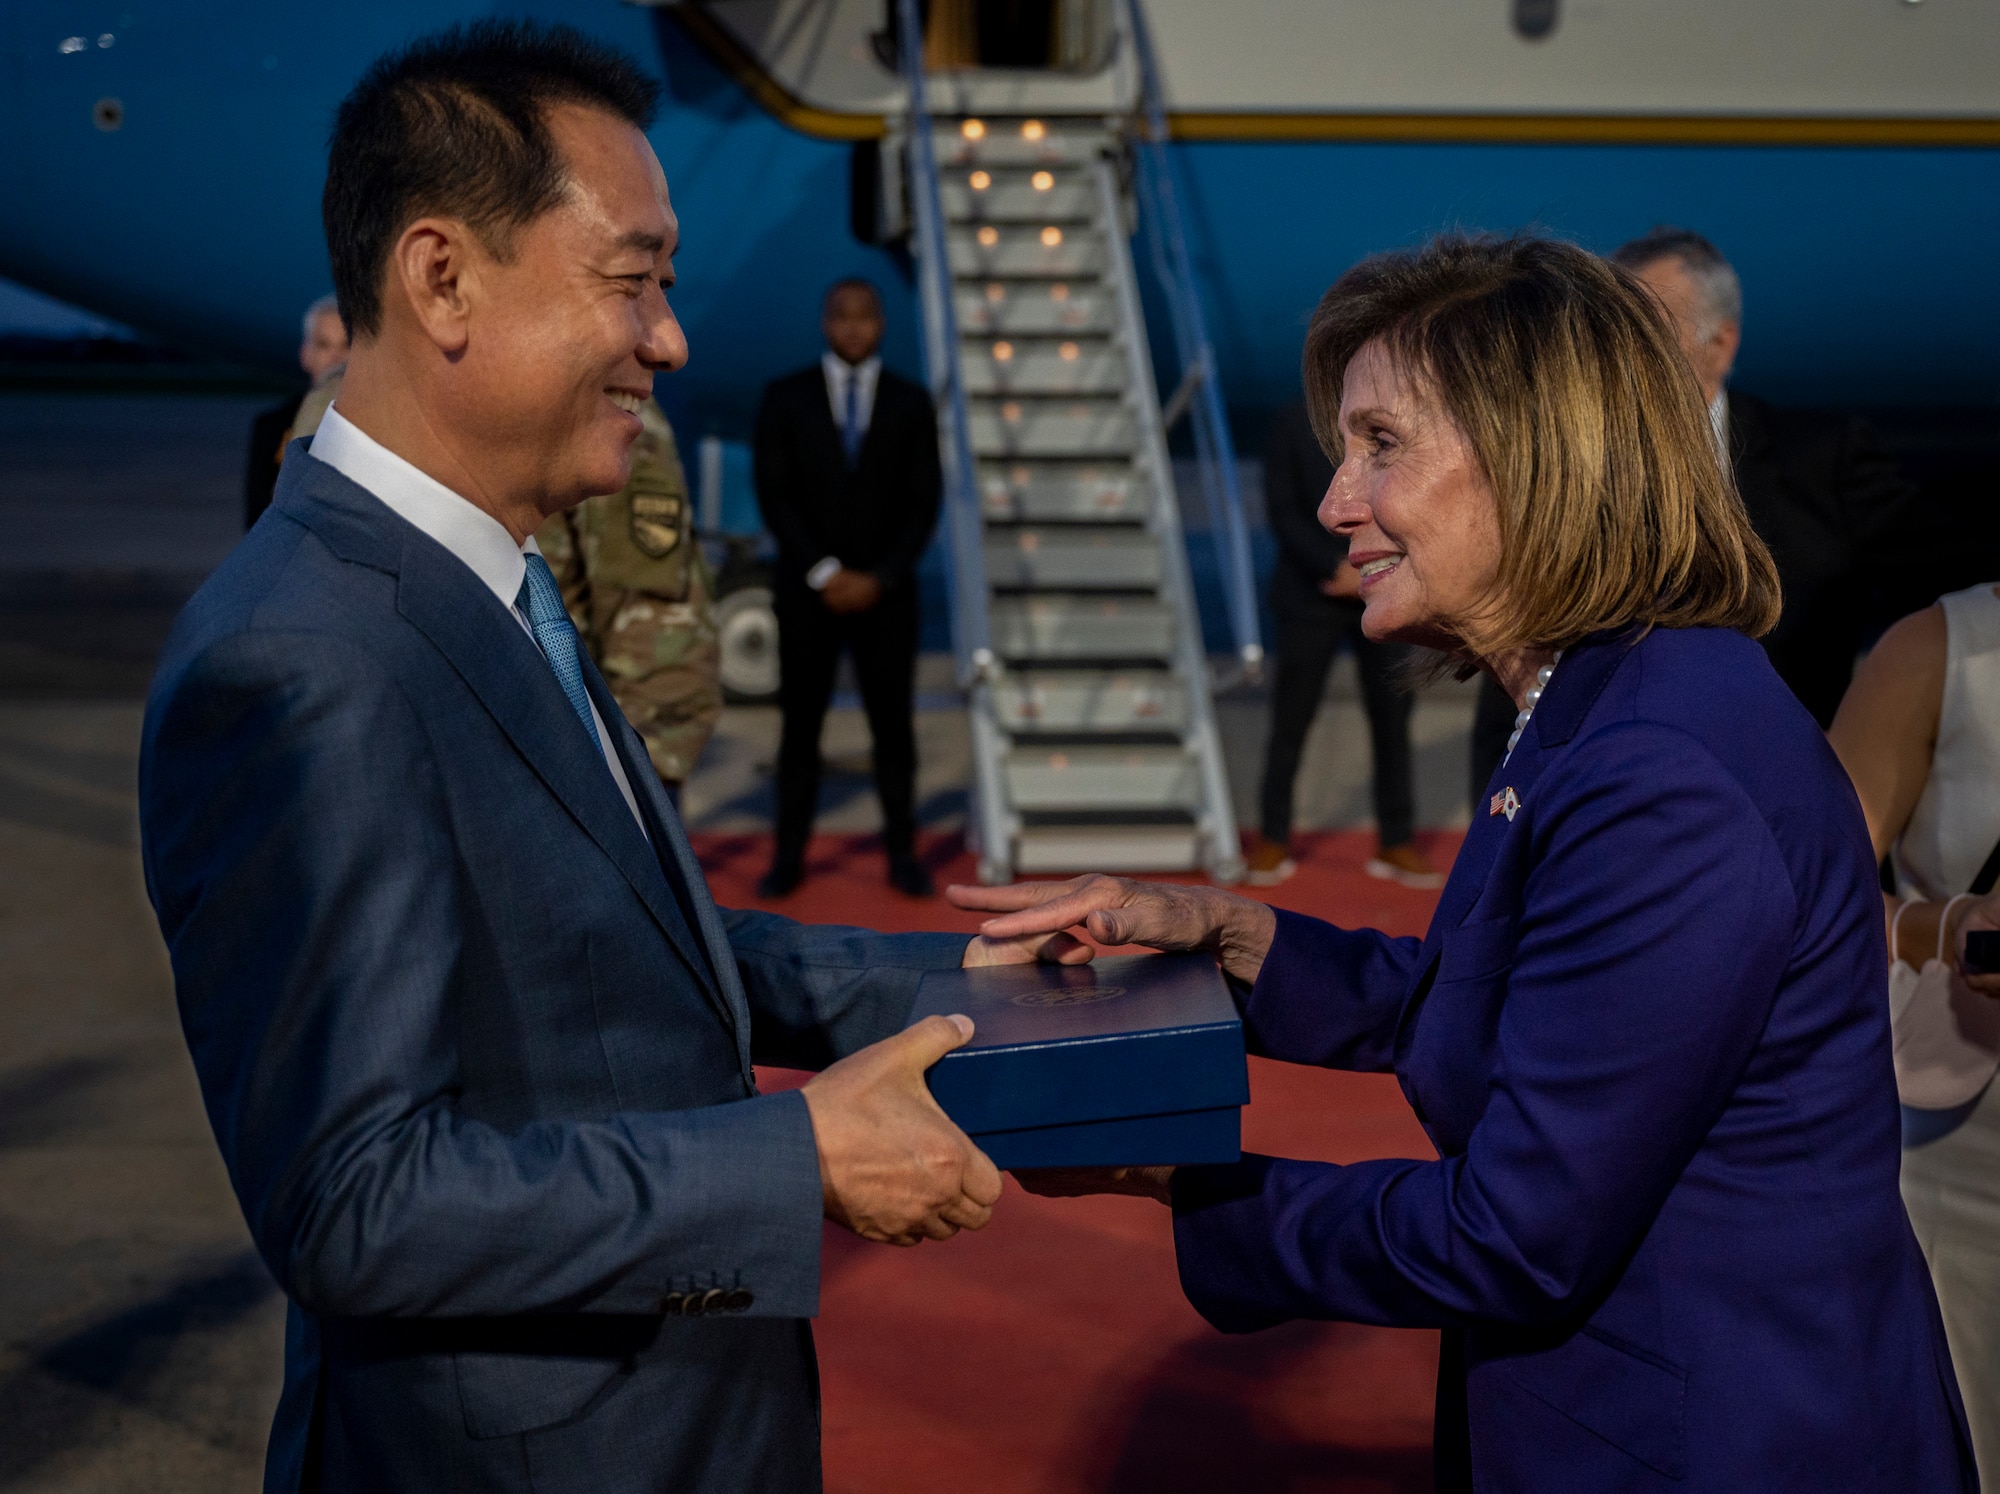 Nancy Pelosi, Speaker of the U.S. House of Representatives, presents a memento to Gwang-jae Lee, Secretary of the National Assembly of the Republic of Korea, at Osan Air Base, Republic of Korea, Aug 3, 2022.